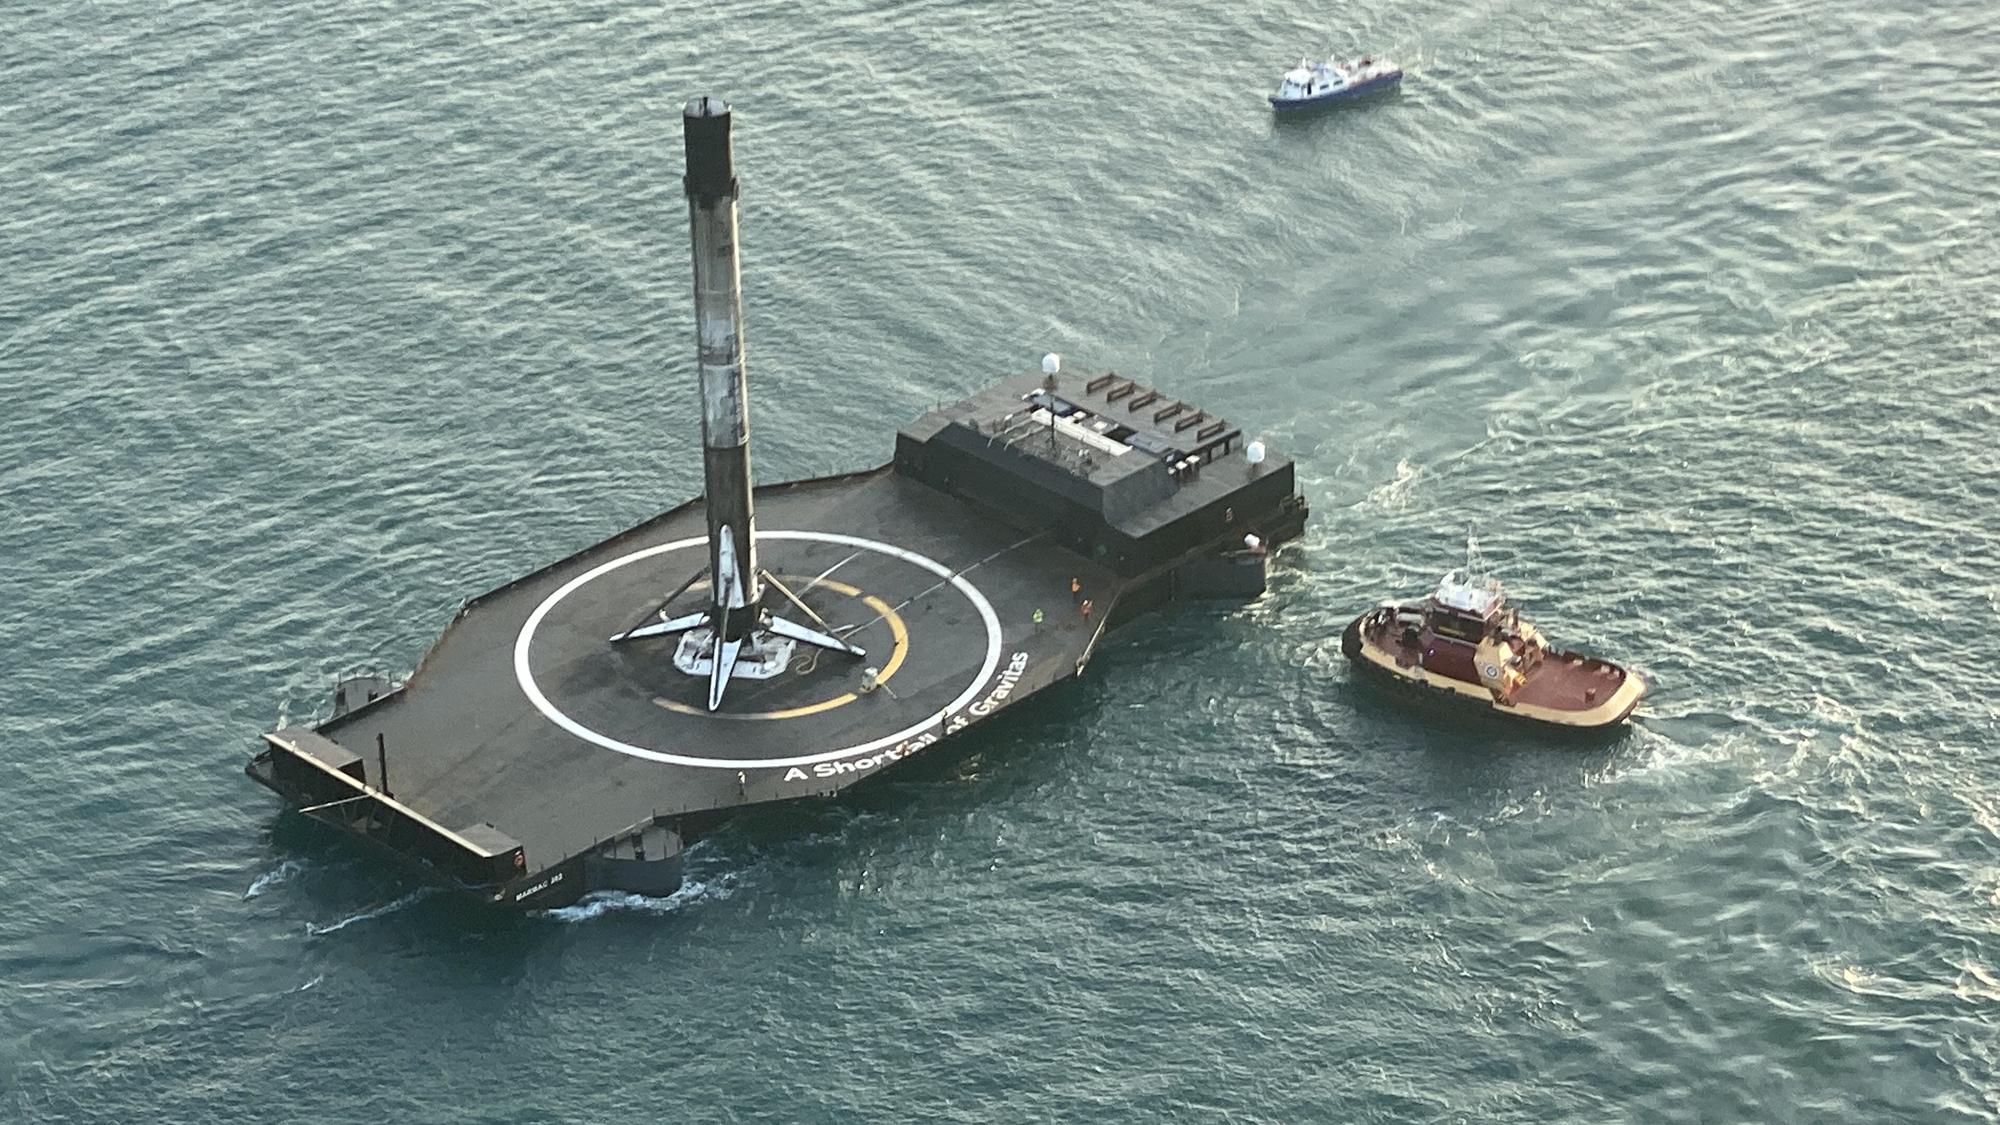 SpaceX's newest drone ship returns to port after 1st rocket landing at sea (photos, videos) | Space